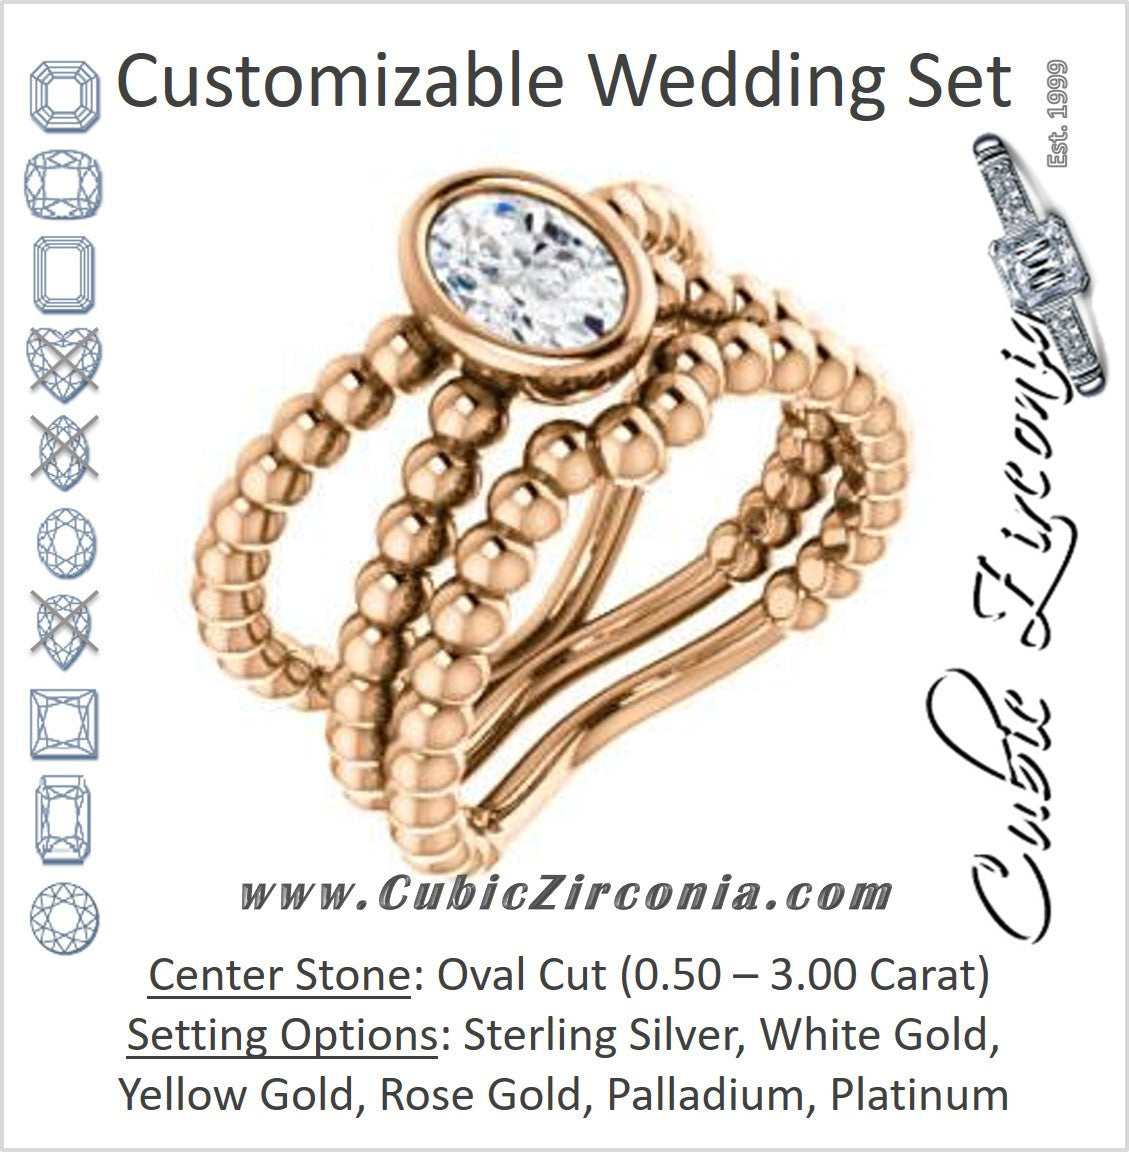 CZ Wedding Set, featuring The Maria Leeslii engagement ring (Customizable Bezel-set Oval Cut Solitaire with Wide Beaded-Metal Split-Band)